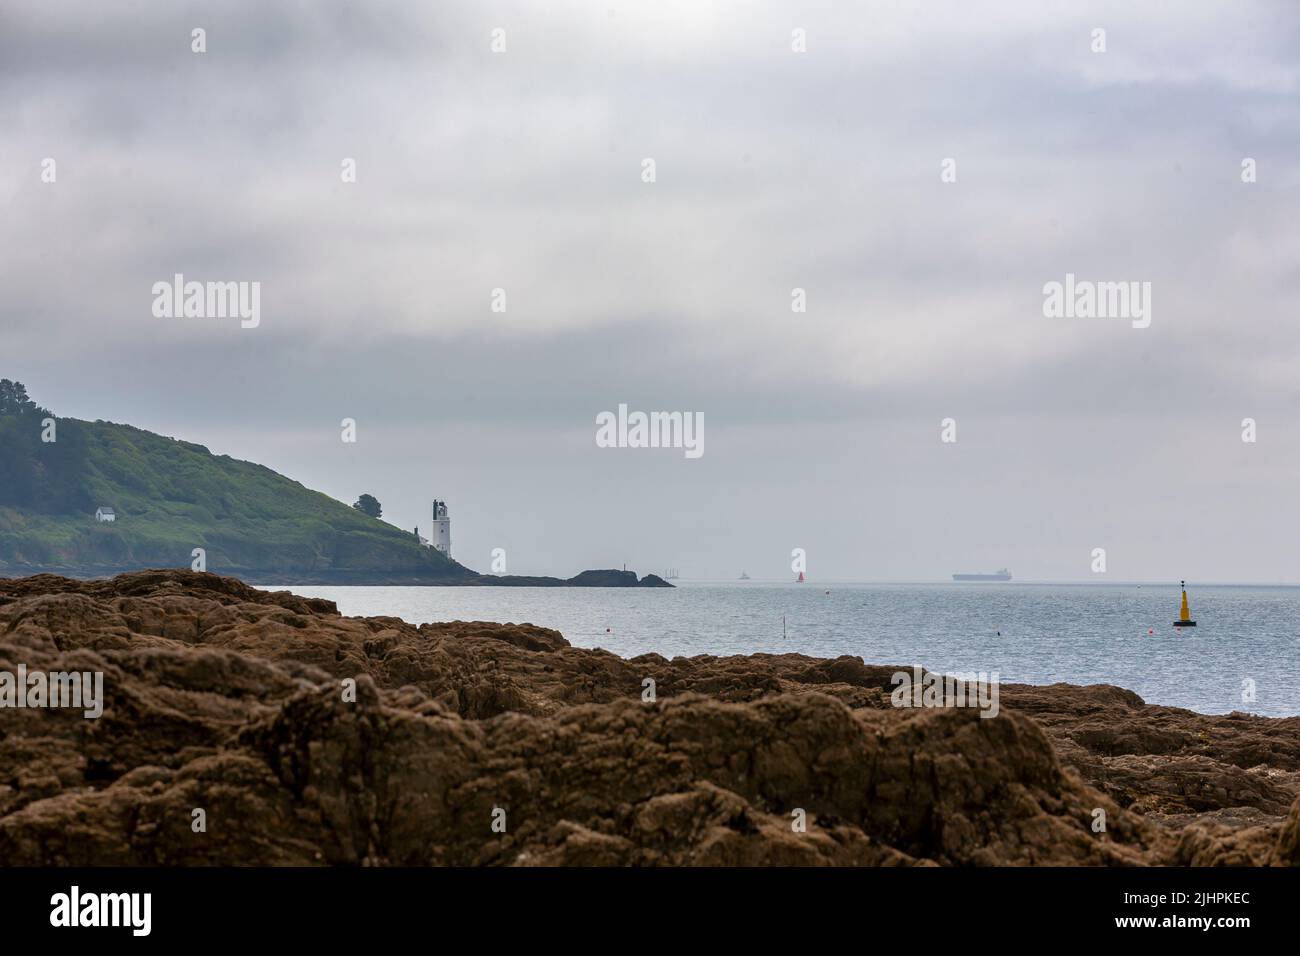 Mouth of the River Fal, with the lighthouse on St. Anthony Head across the entrance to the Percuil River, from Castle Cove, St. Mawes, Cornwall, UK Stock Photo